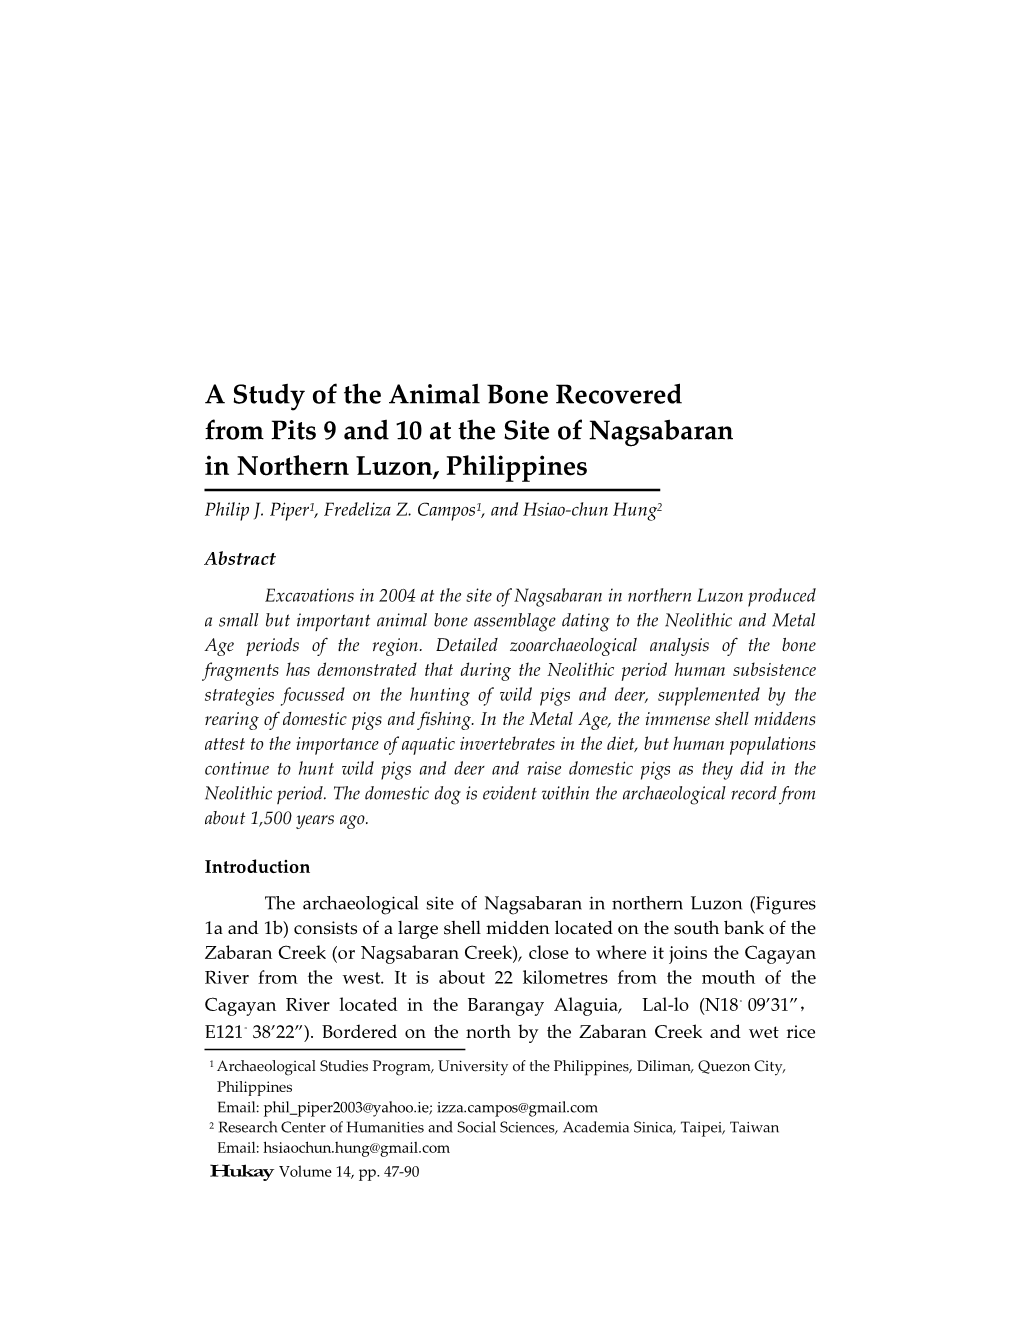 A Study of the Animal Bone Recovered from Pits 9 and 10 at the Site of Nagsabaran in Northern Luzon, Philippines